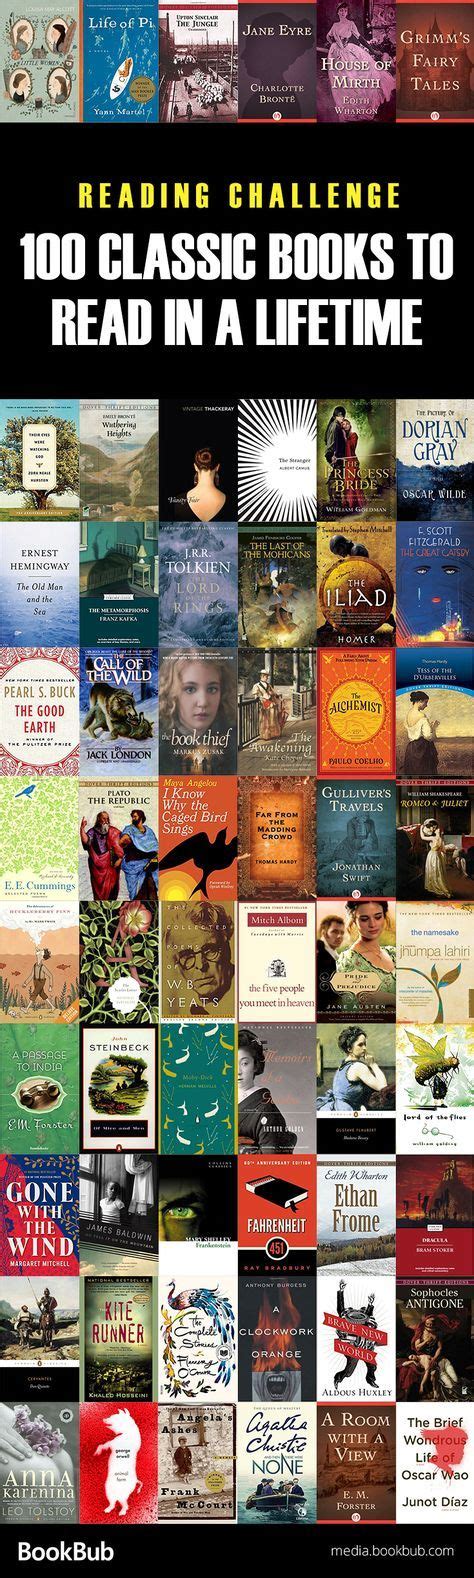 classic reading challenge 100 classics to read in a lifetime this list includes classic books